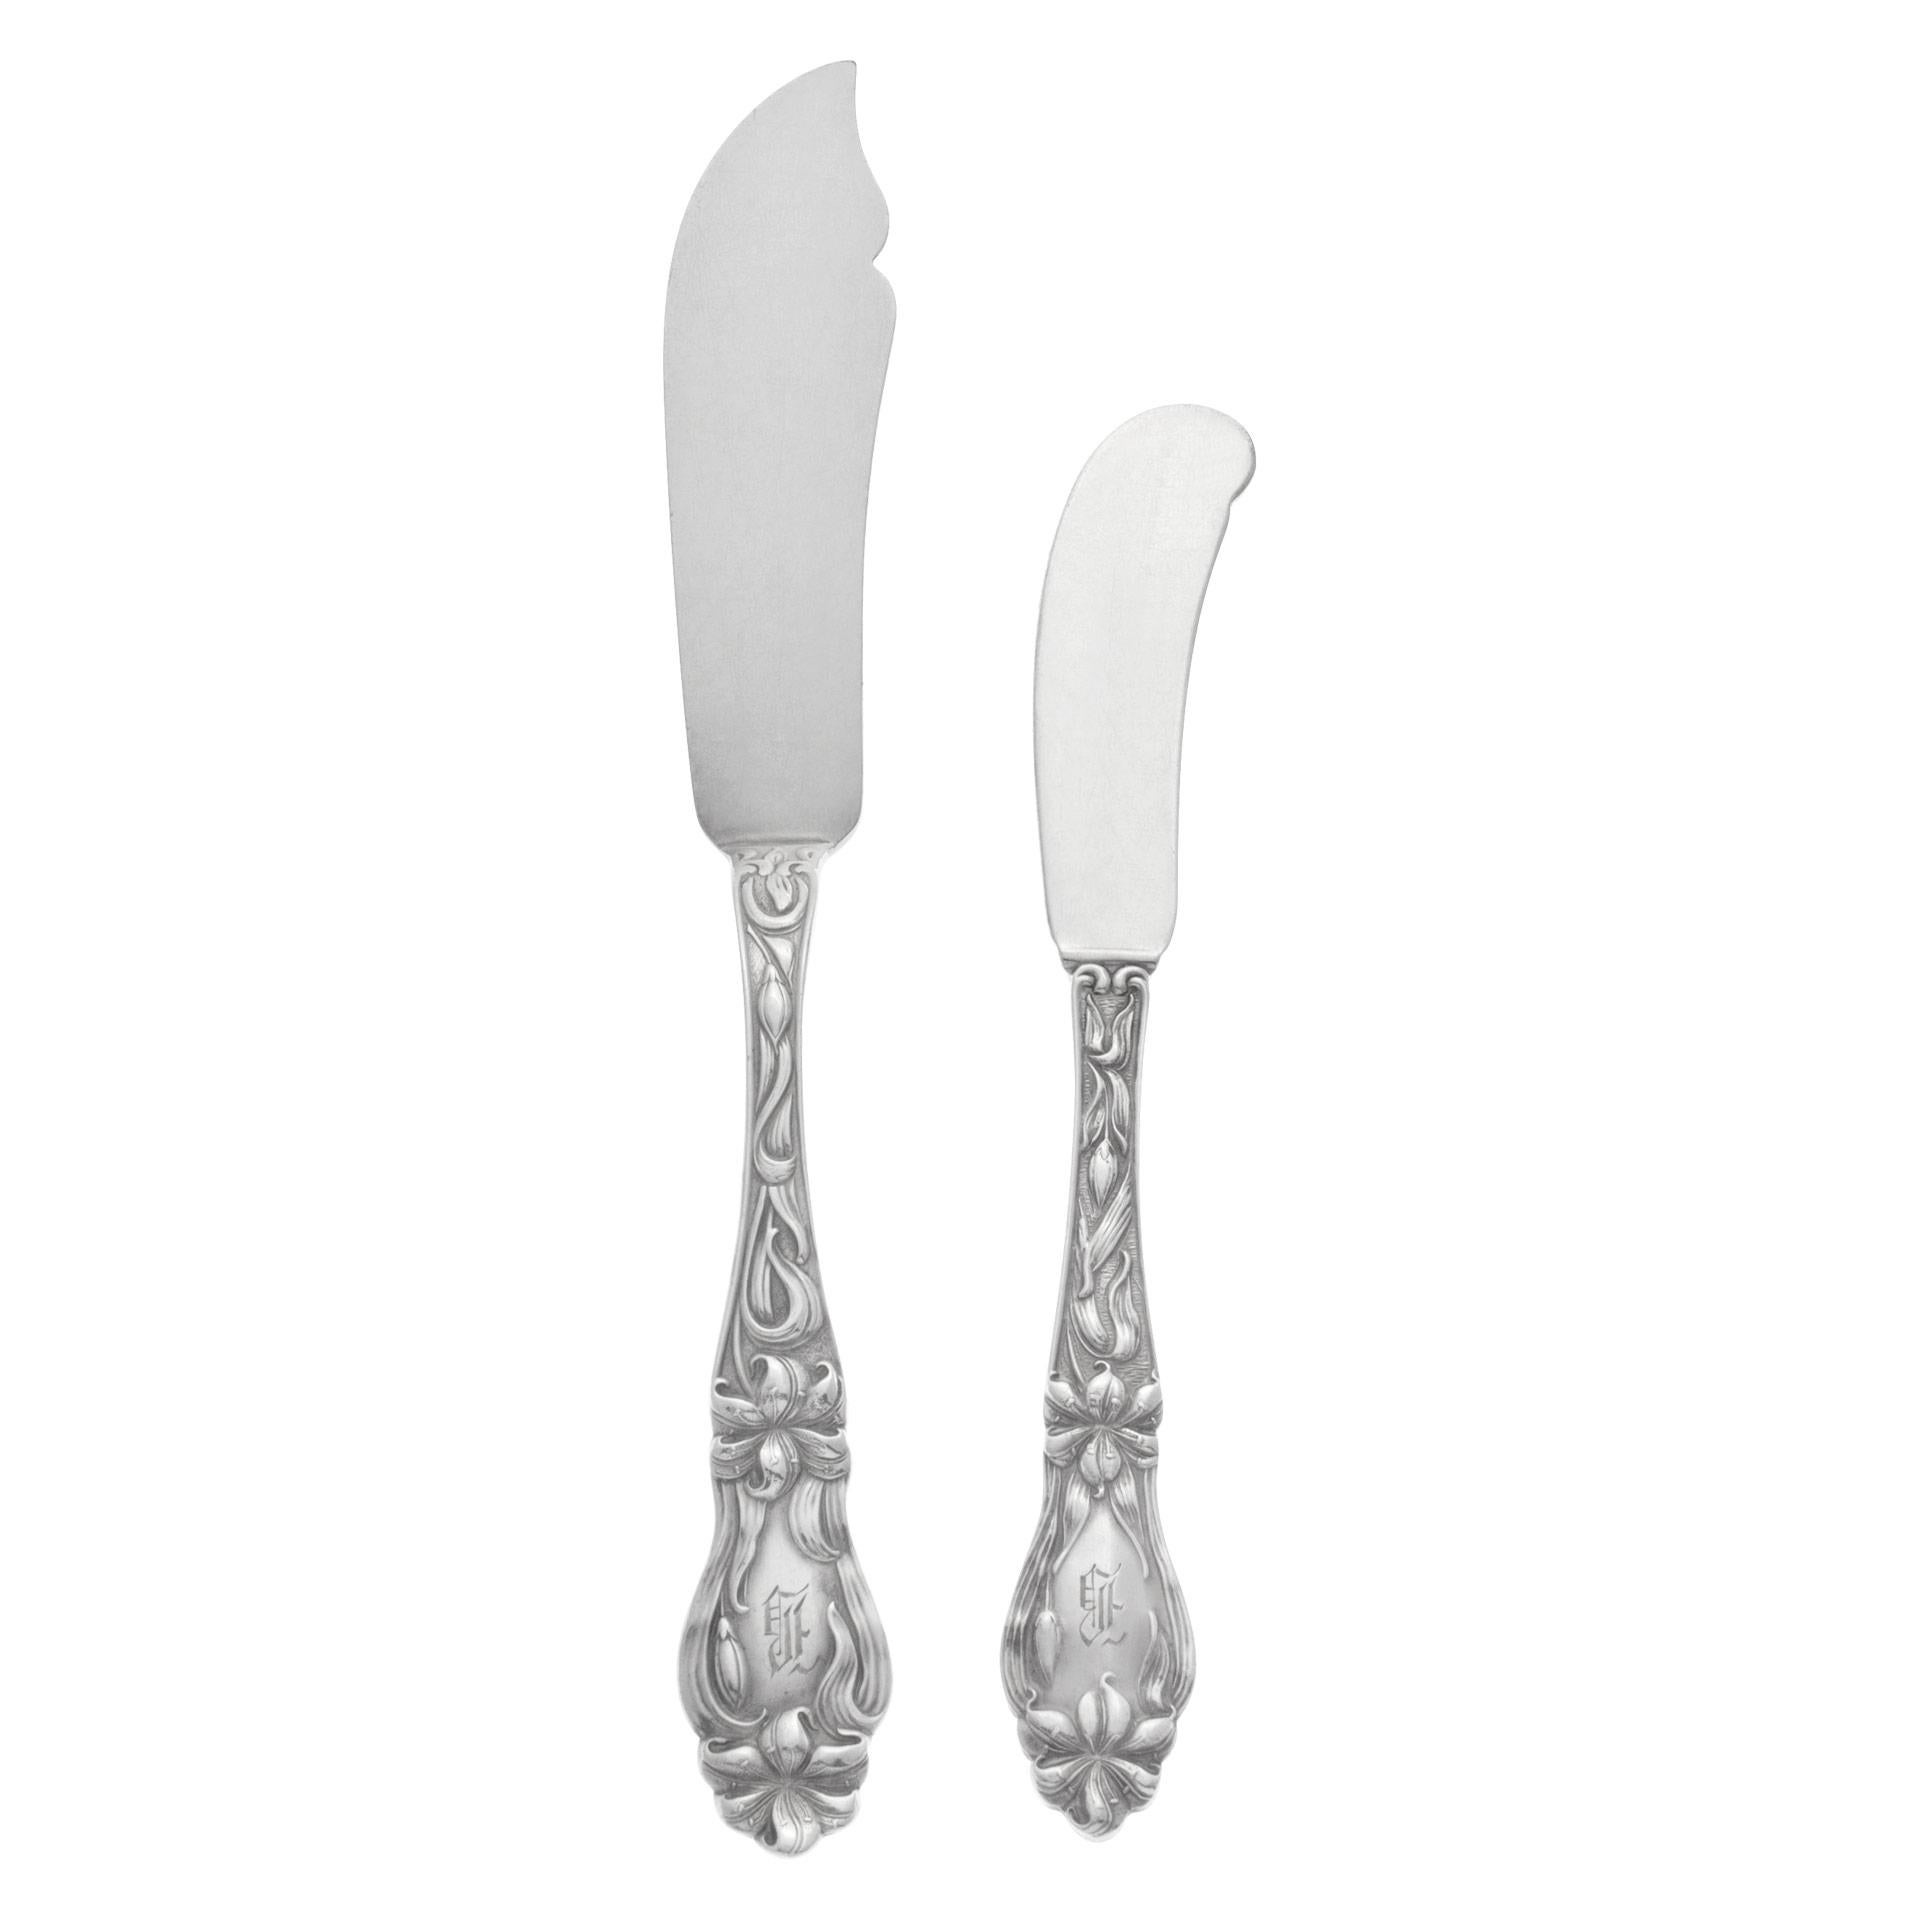 Women's or Men's Sterling Flatware Set Lily Patented in 1910 by Frank M Whiting, Almost Complete For Sale